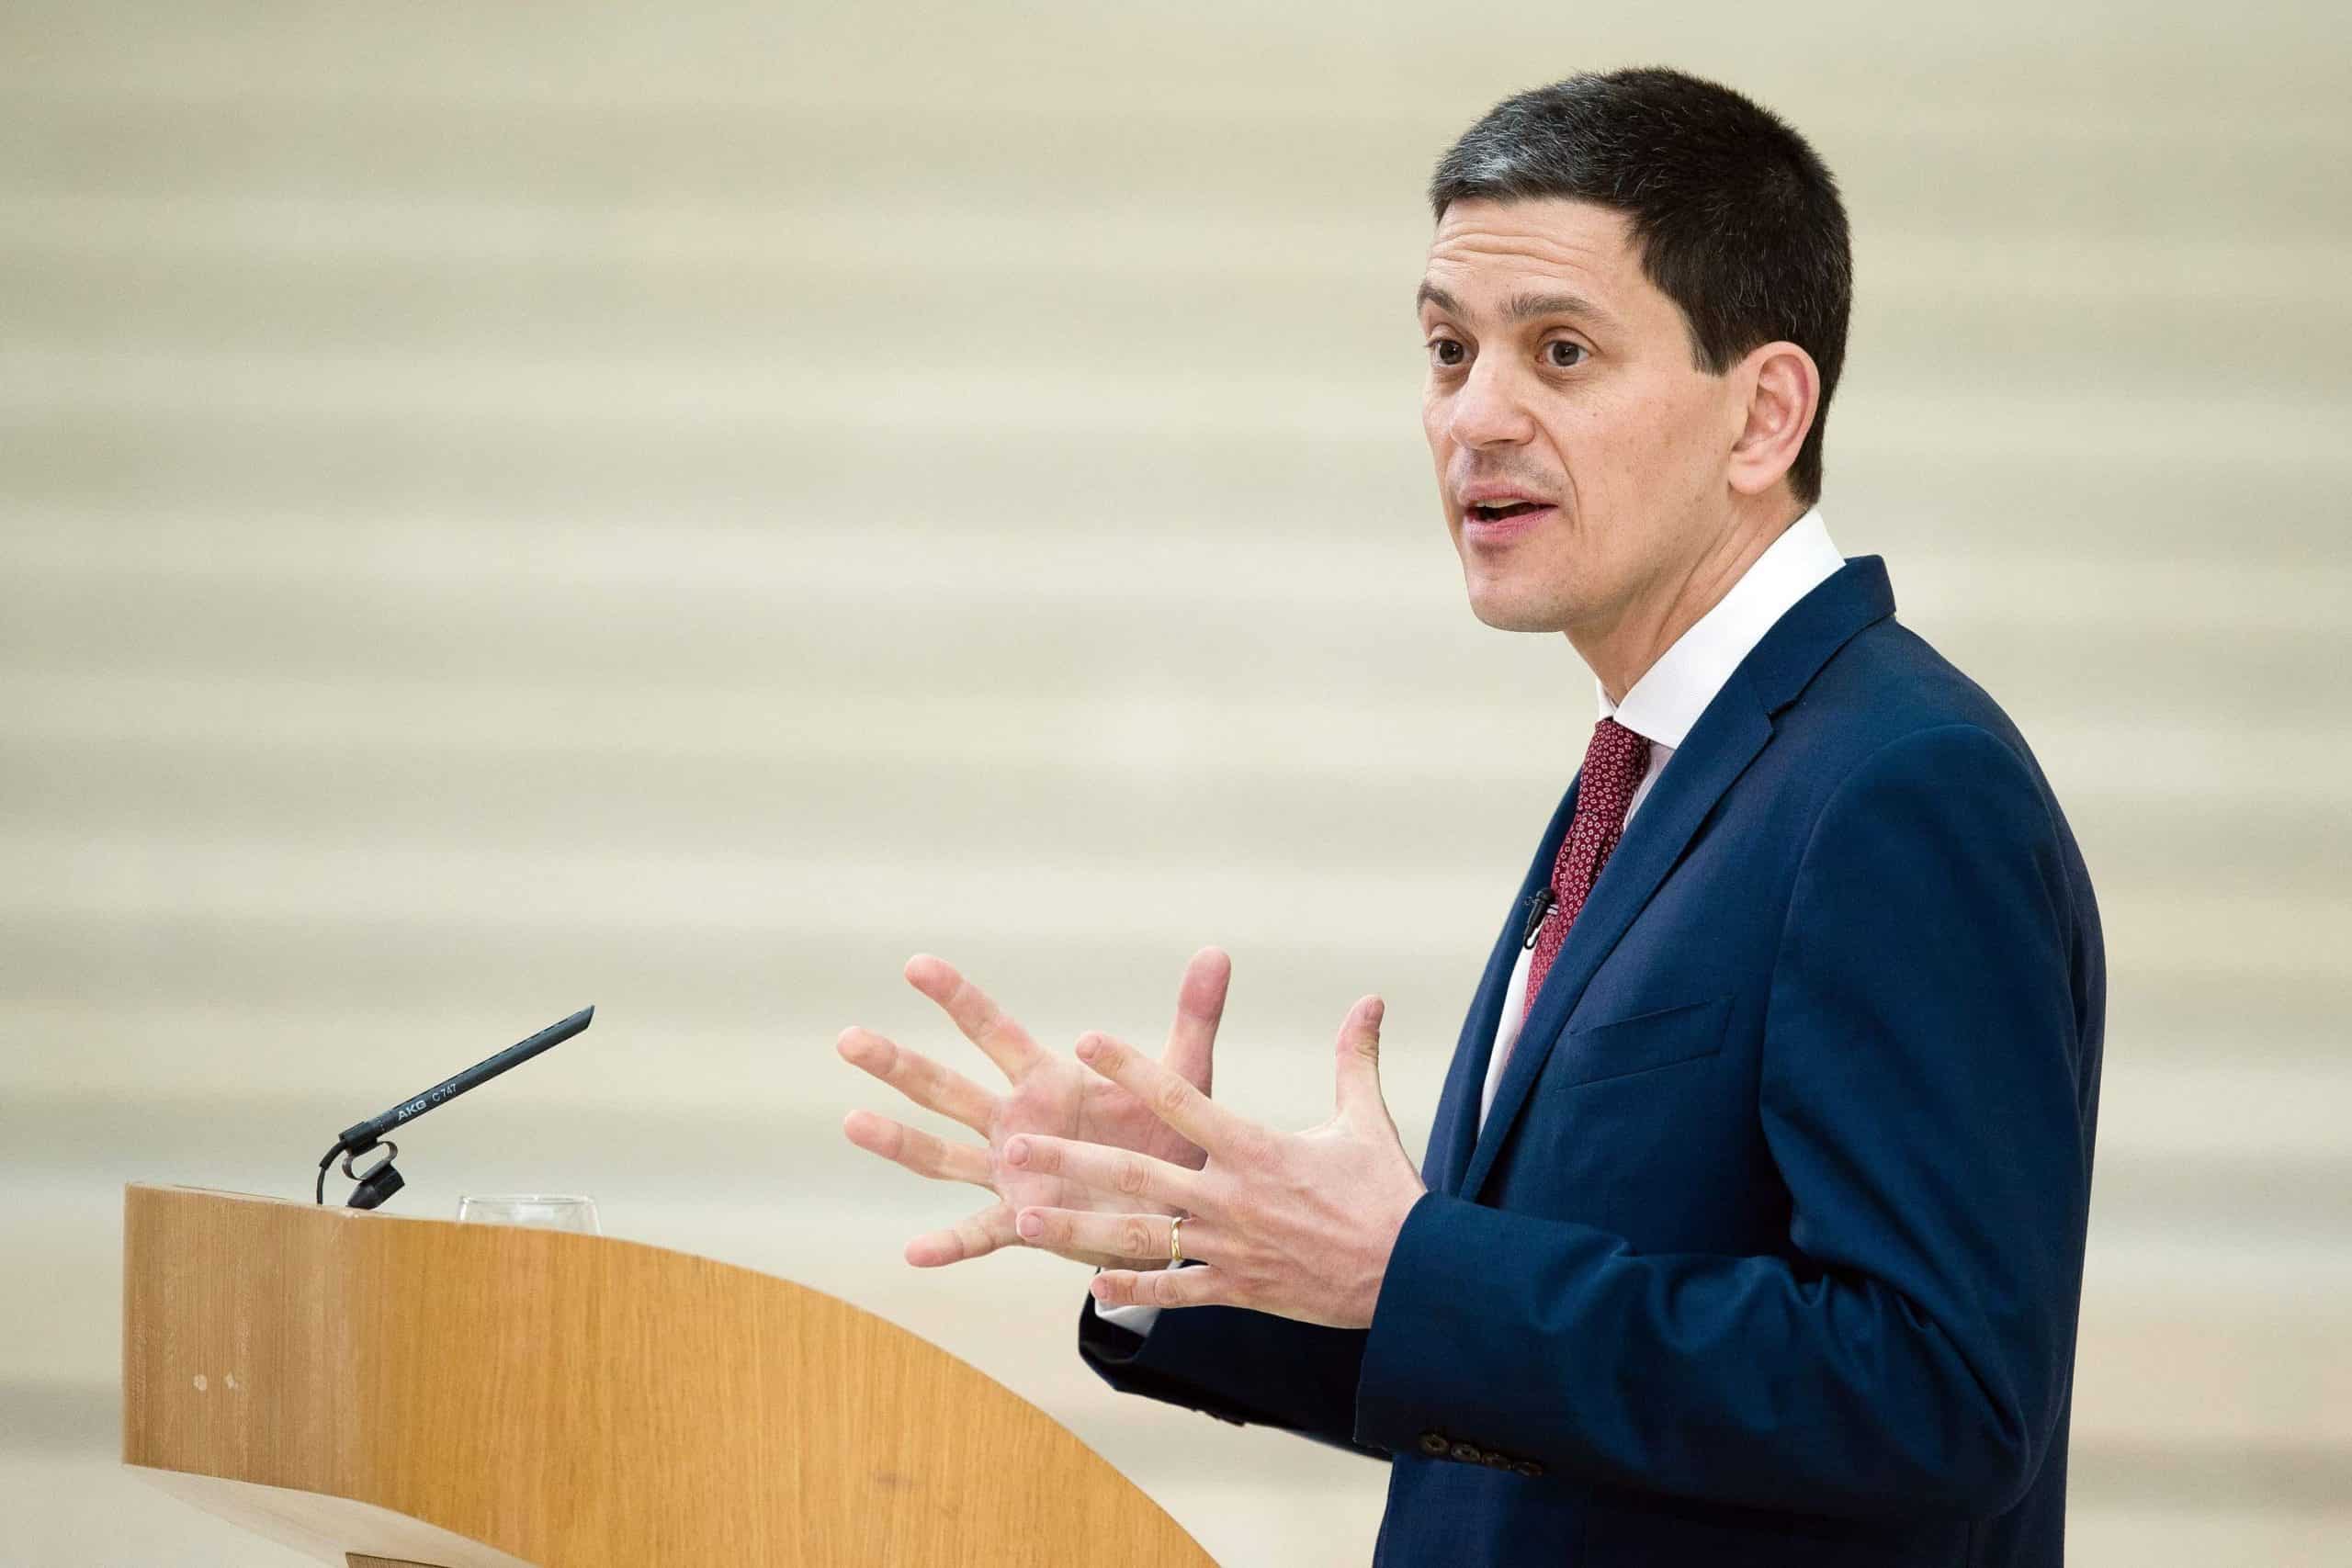 David Miliband’s charity offers unpaid internships… while he pockets £700k